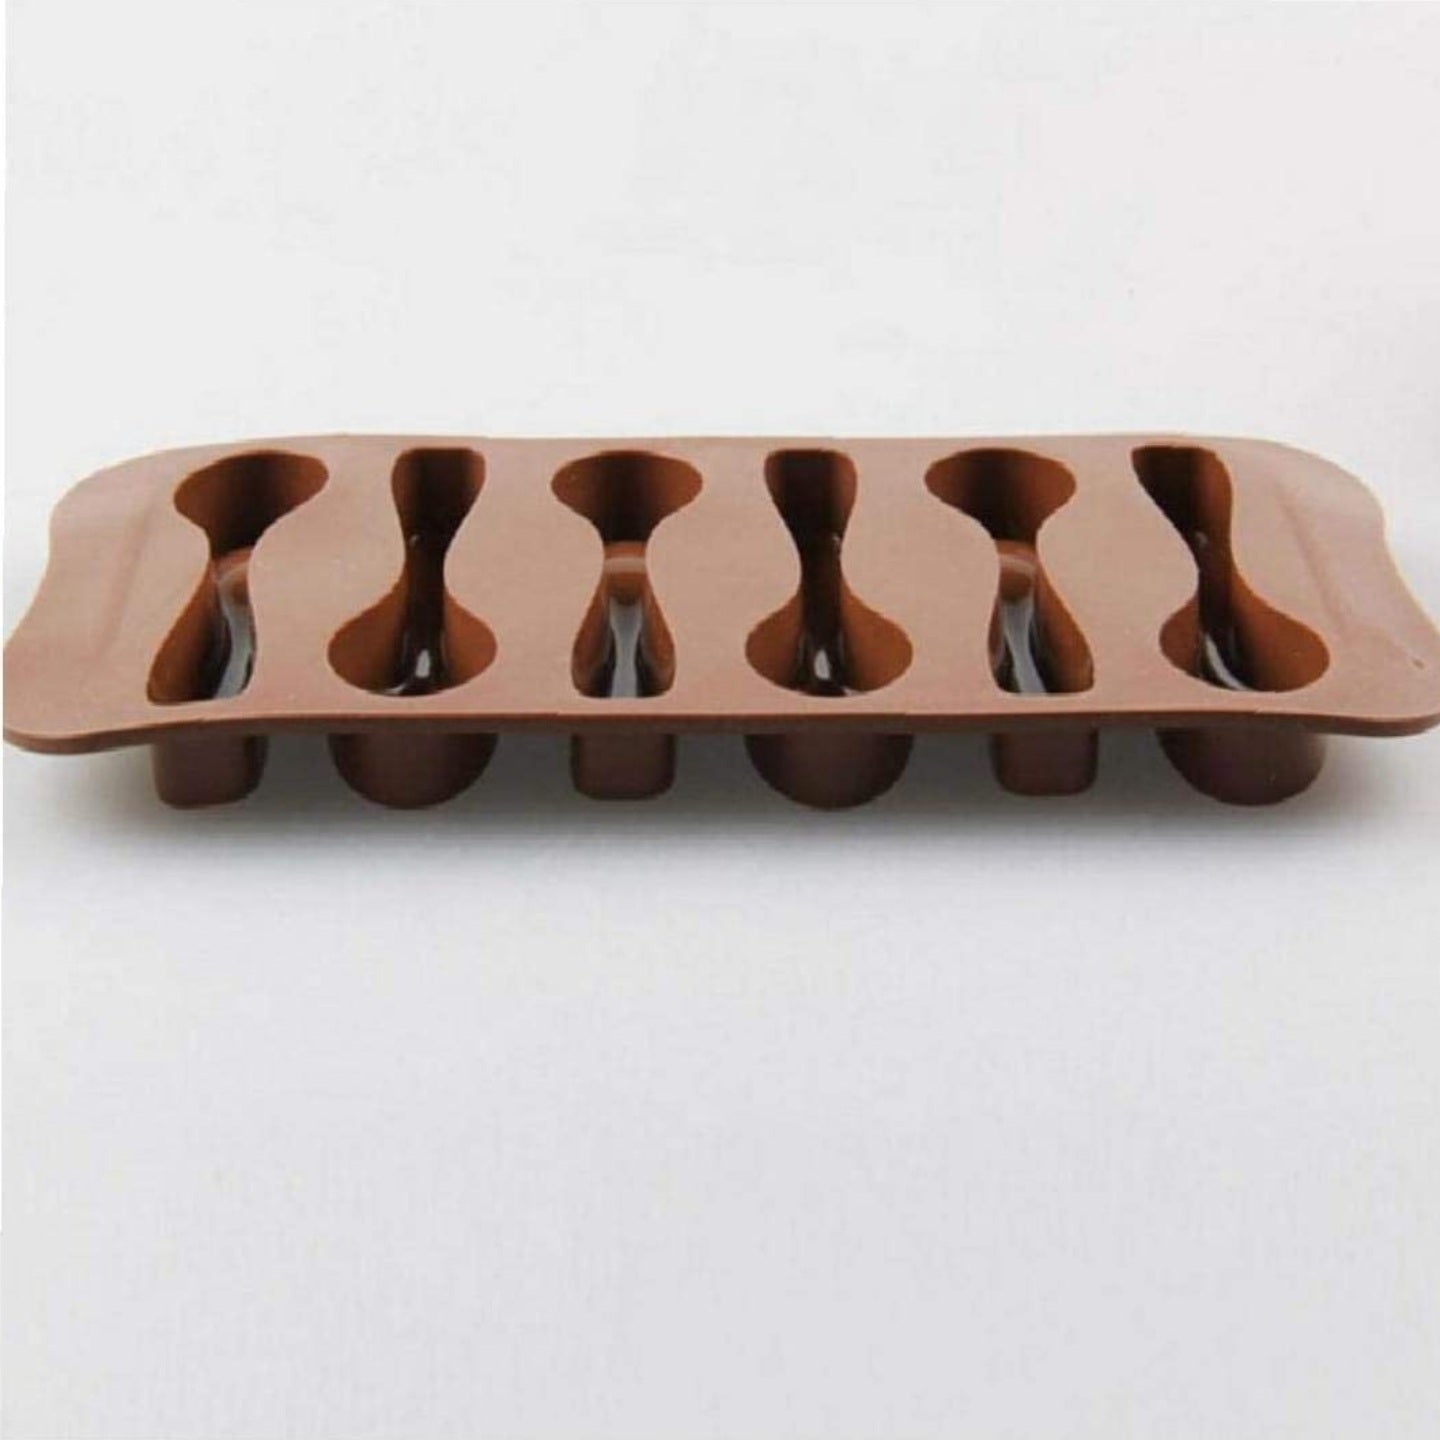 Chocolate spoons silicone mold